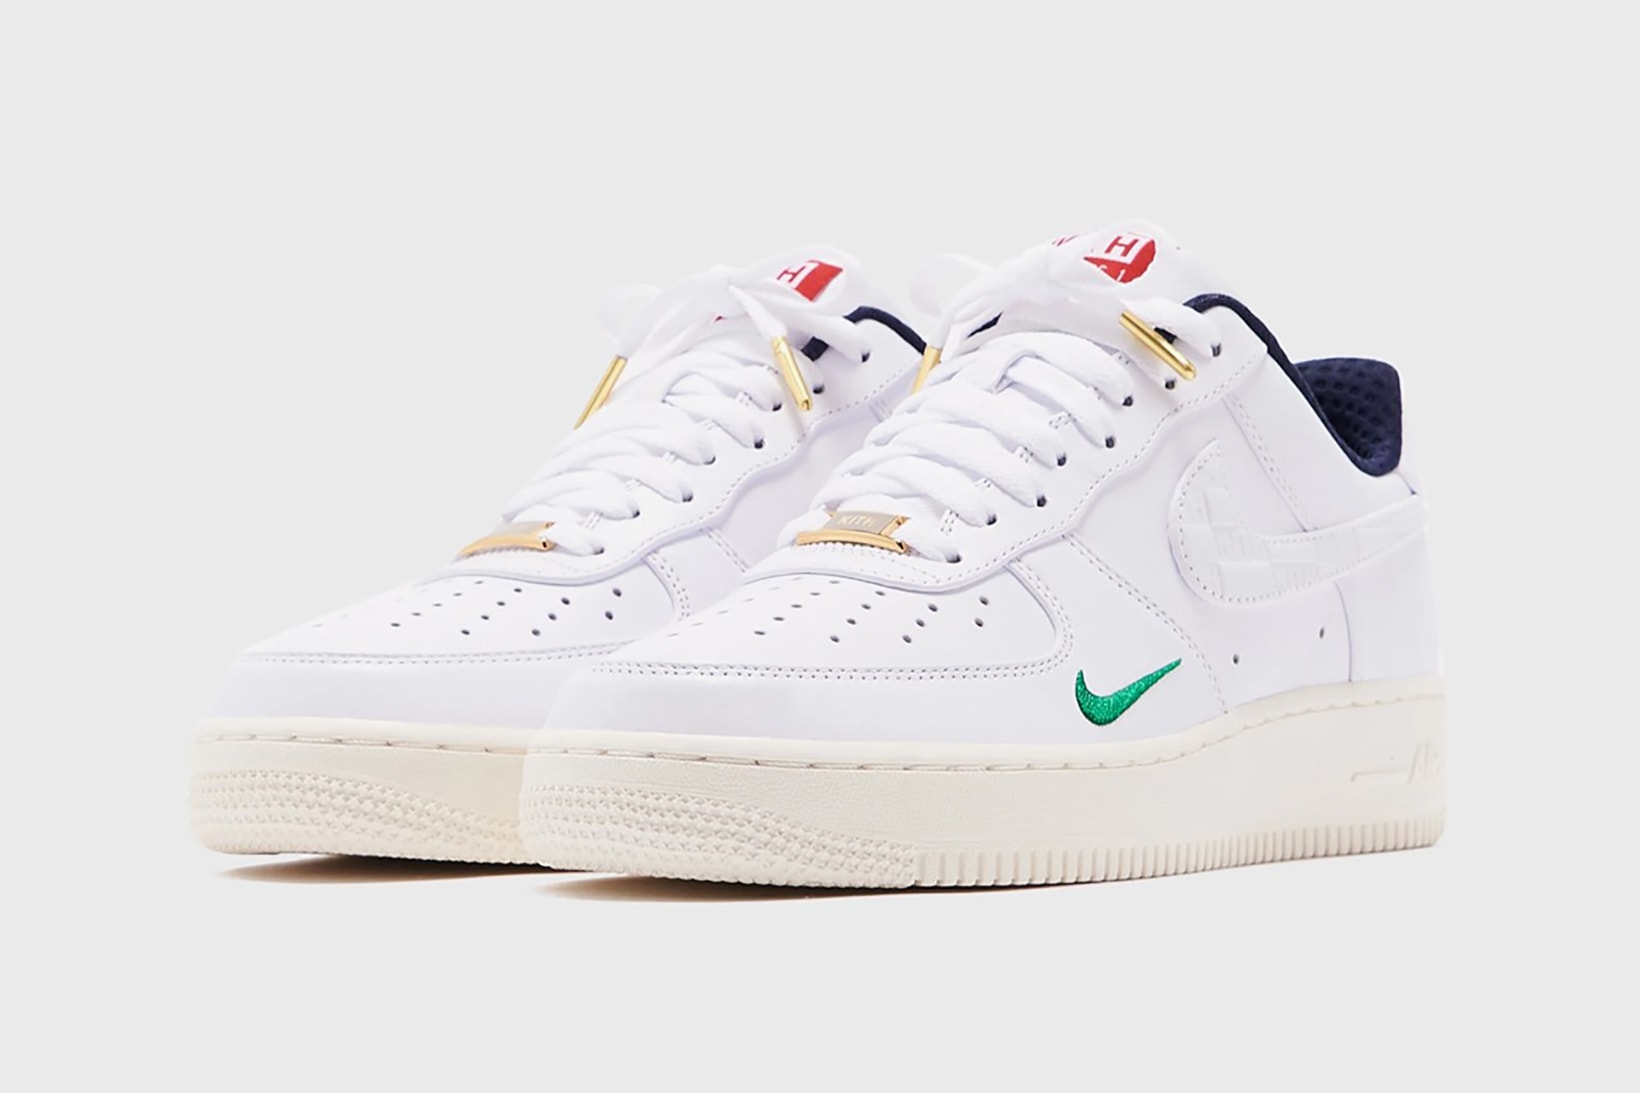 kith nike air force 1 low collaboration sneakers raffle charity ronnie fieg white green red blue sneakerhead shoes footwear